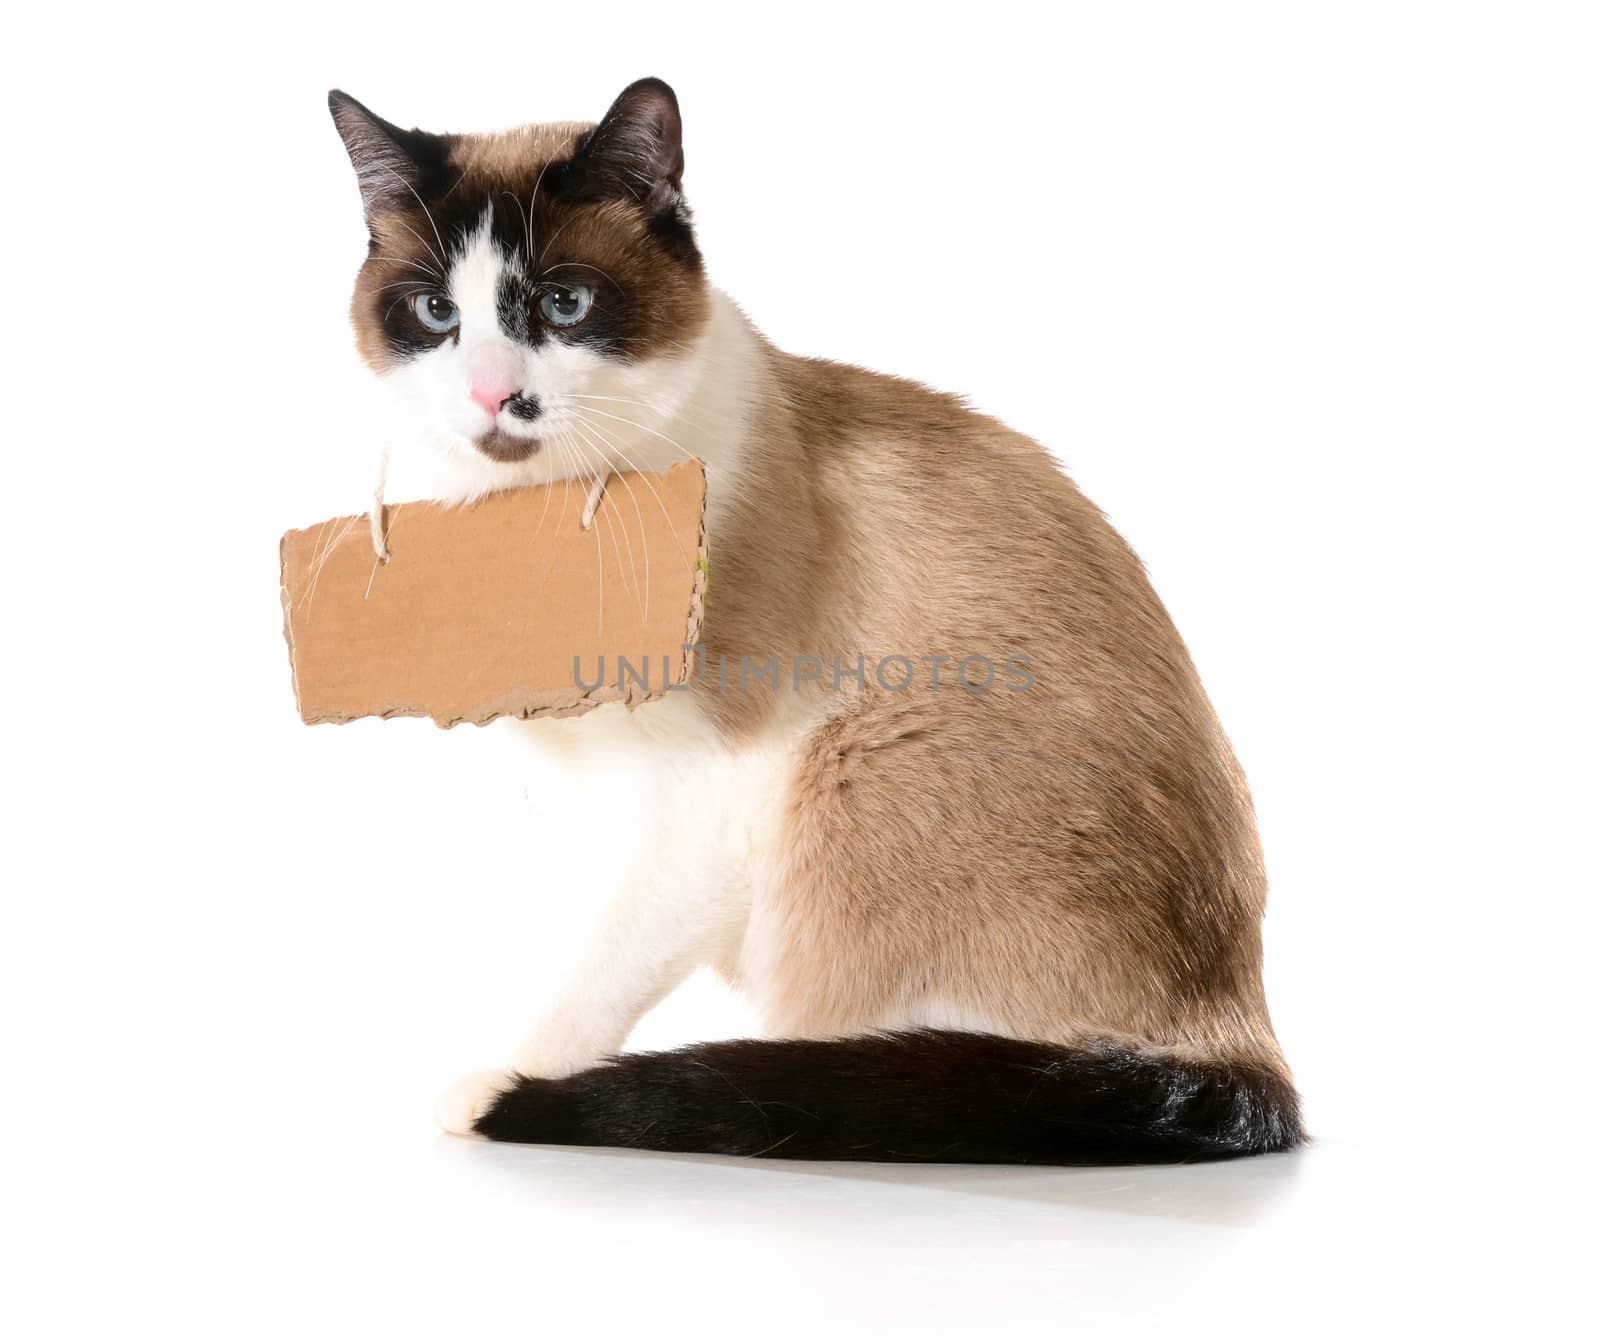 cat communication - ragdoll cat wearing a cardboard sign isolated on white background